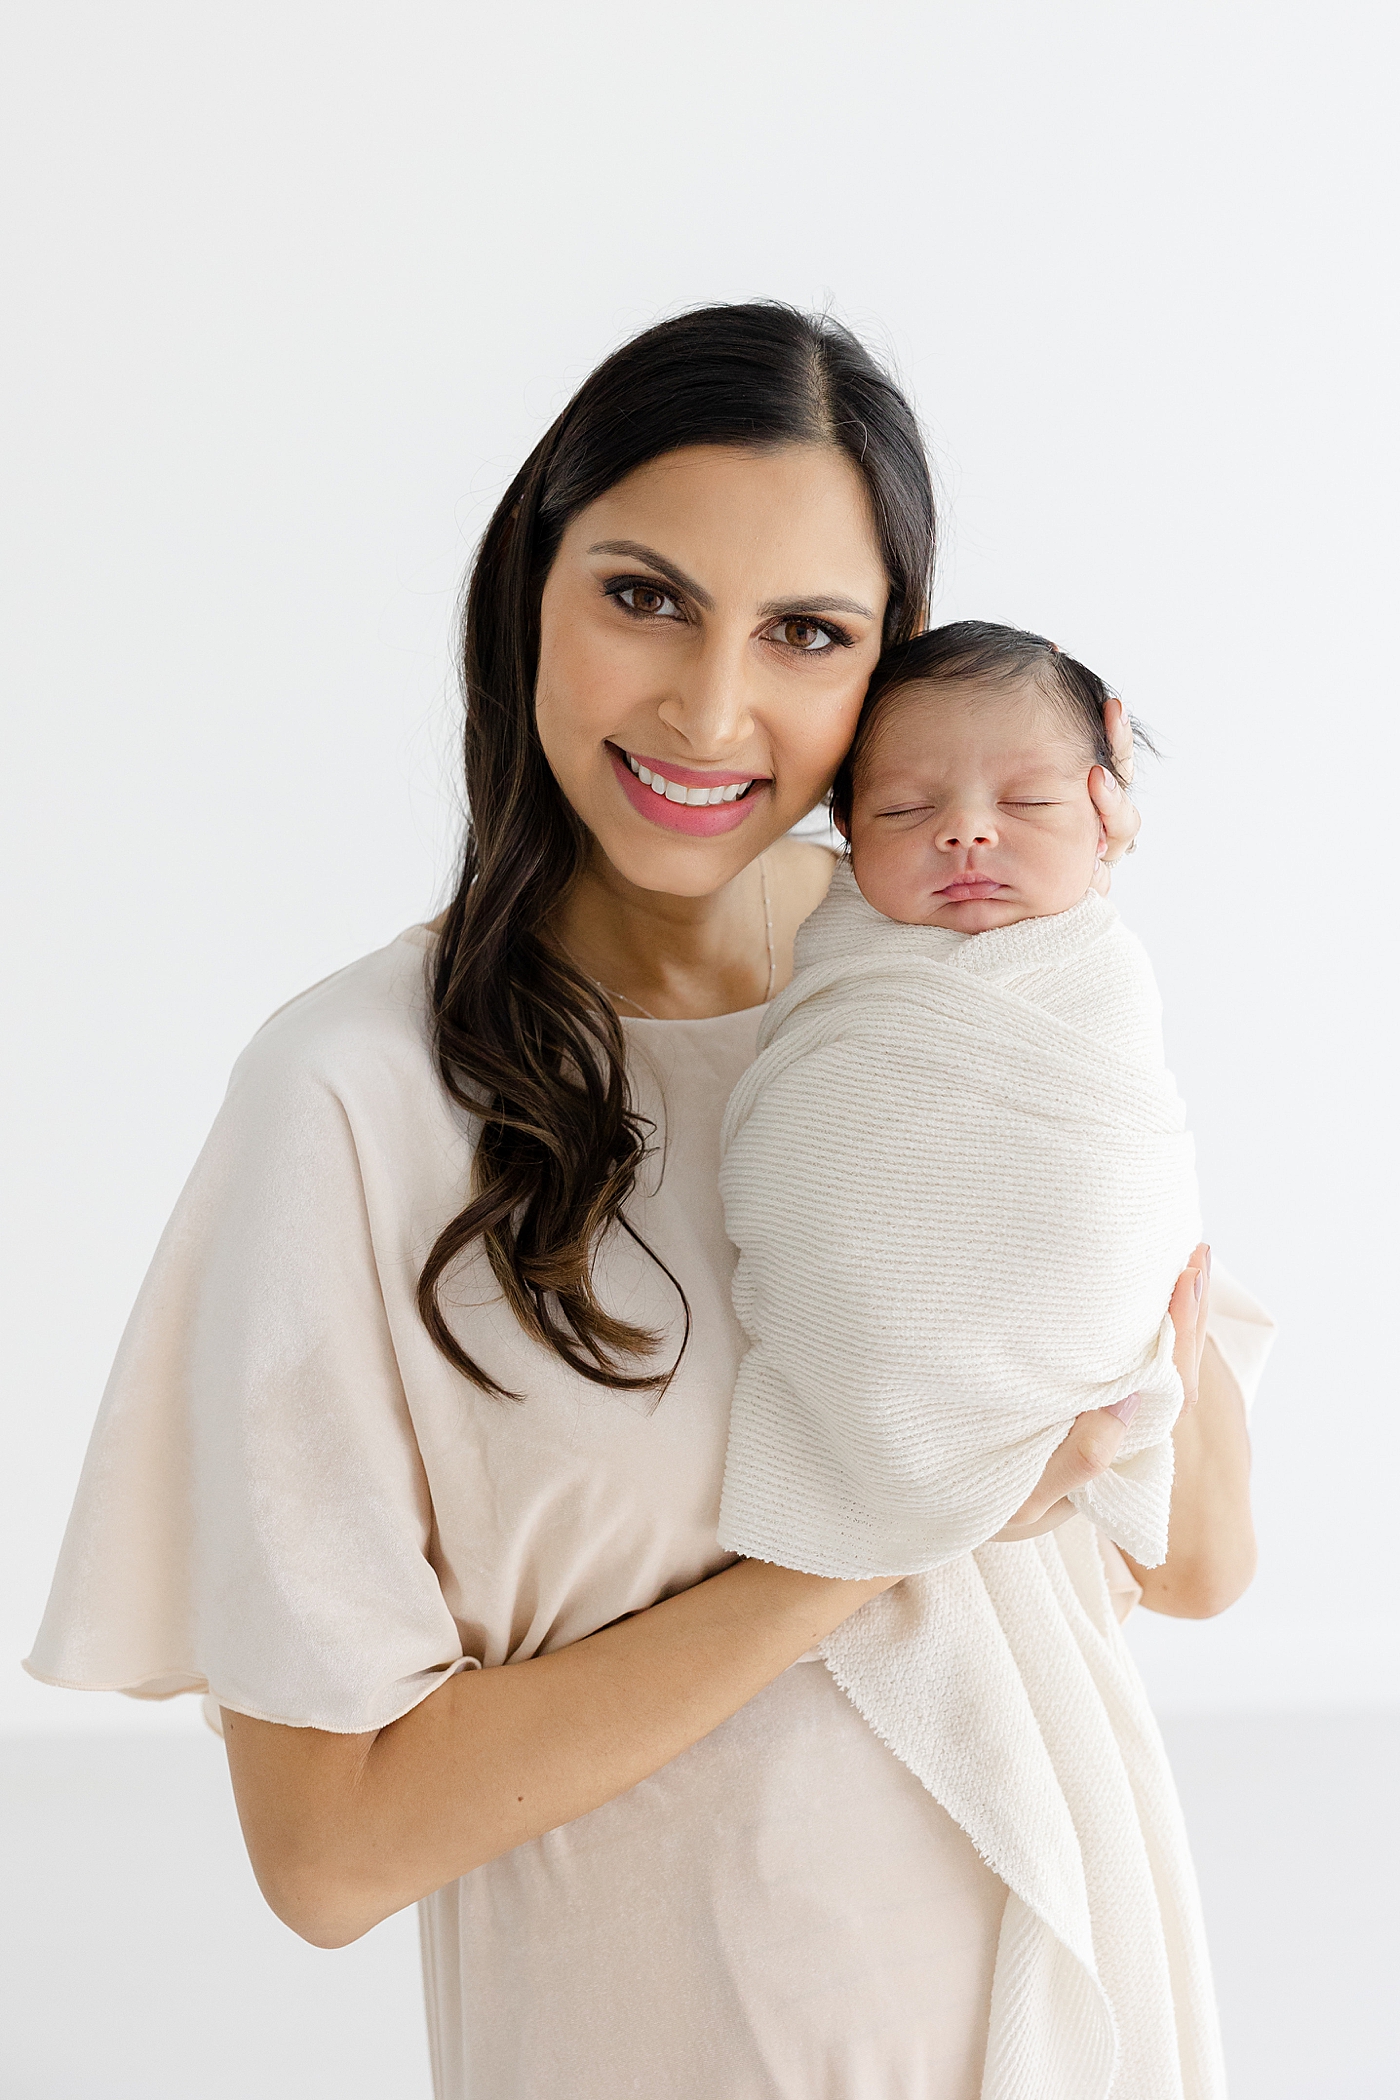 Mom smiling, holding her new baby during their Studio Newborn Session in Austin | Image by Sana Ahmed Photography 